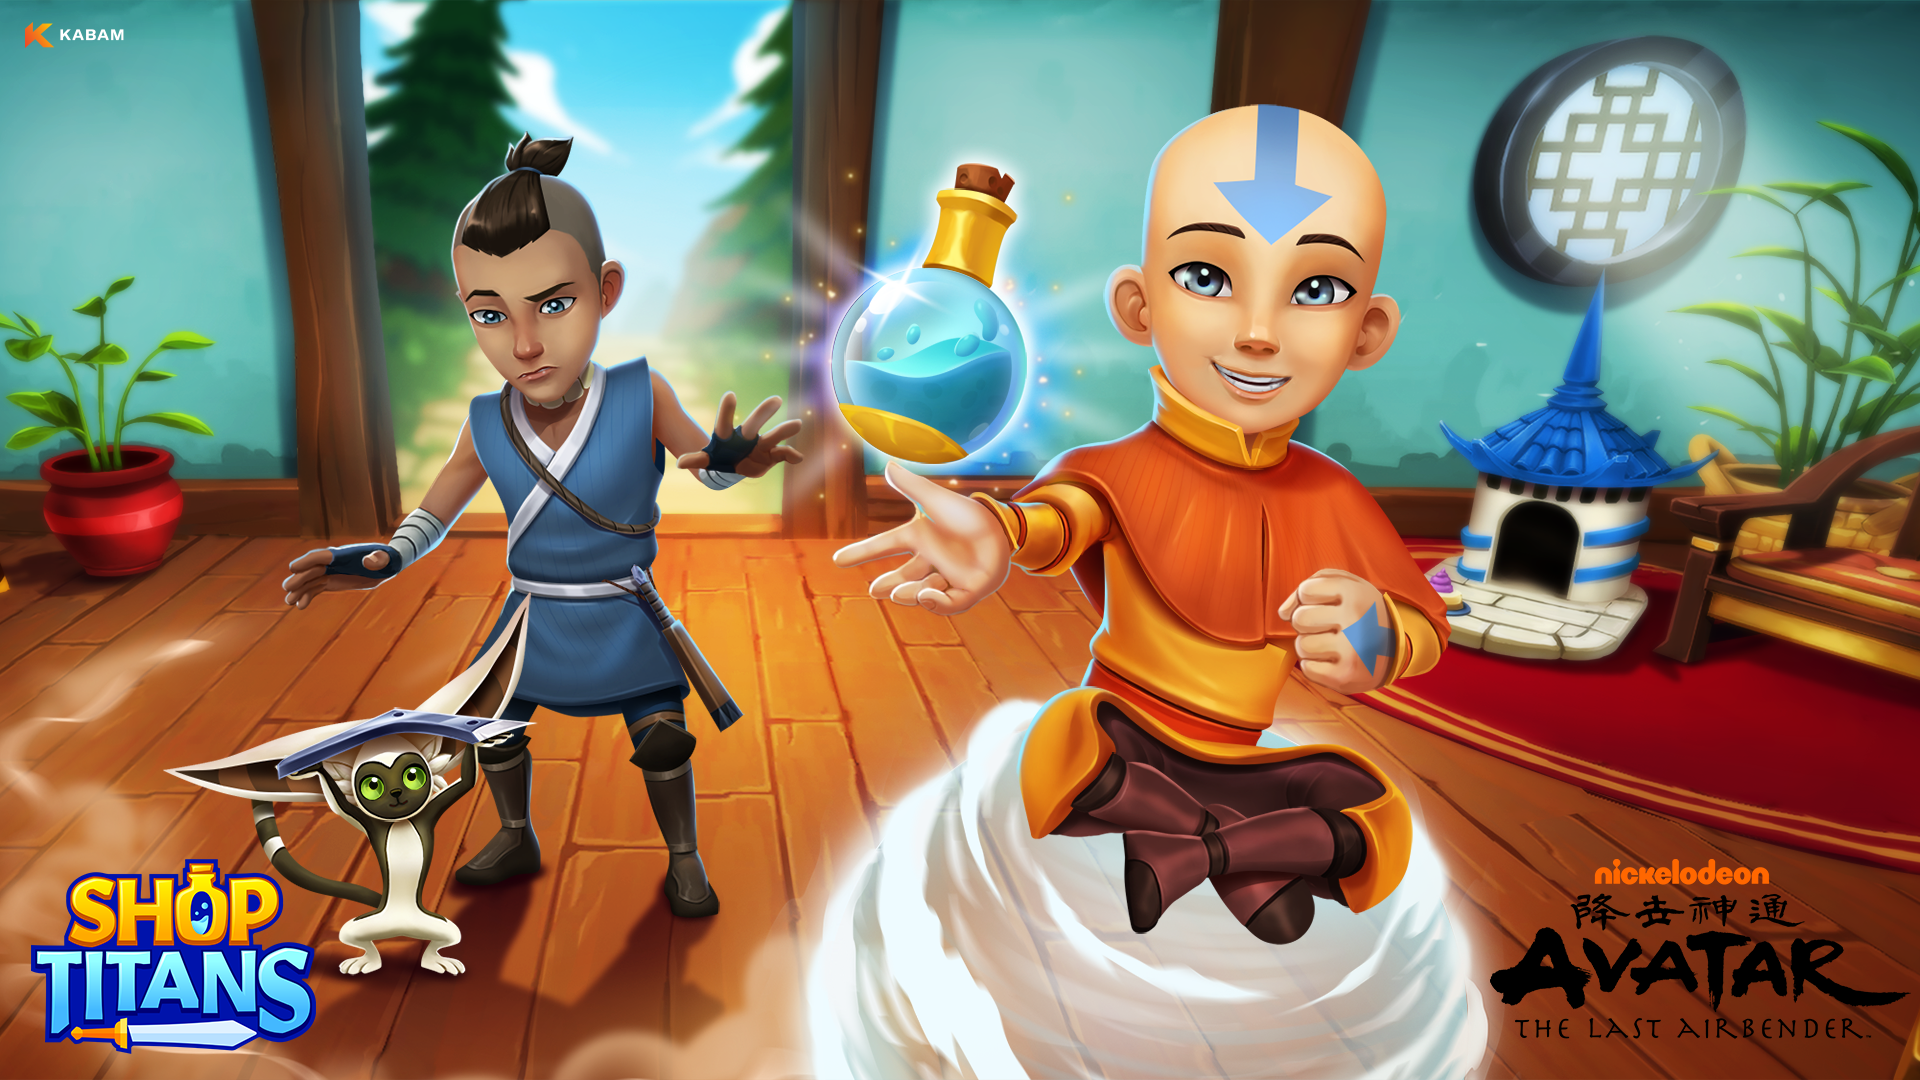 New Leak Indicates An Avatar The Last Airbender Game Is In The Works For  All Consoles  The Illuminerdi